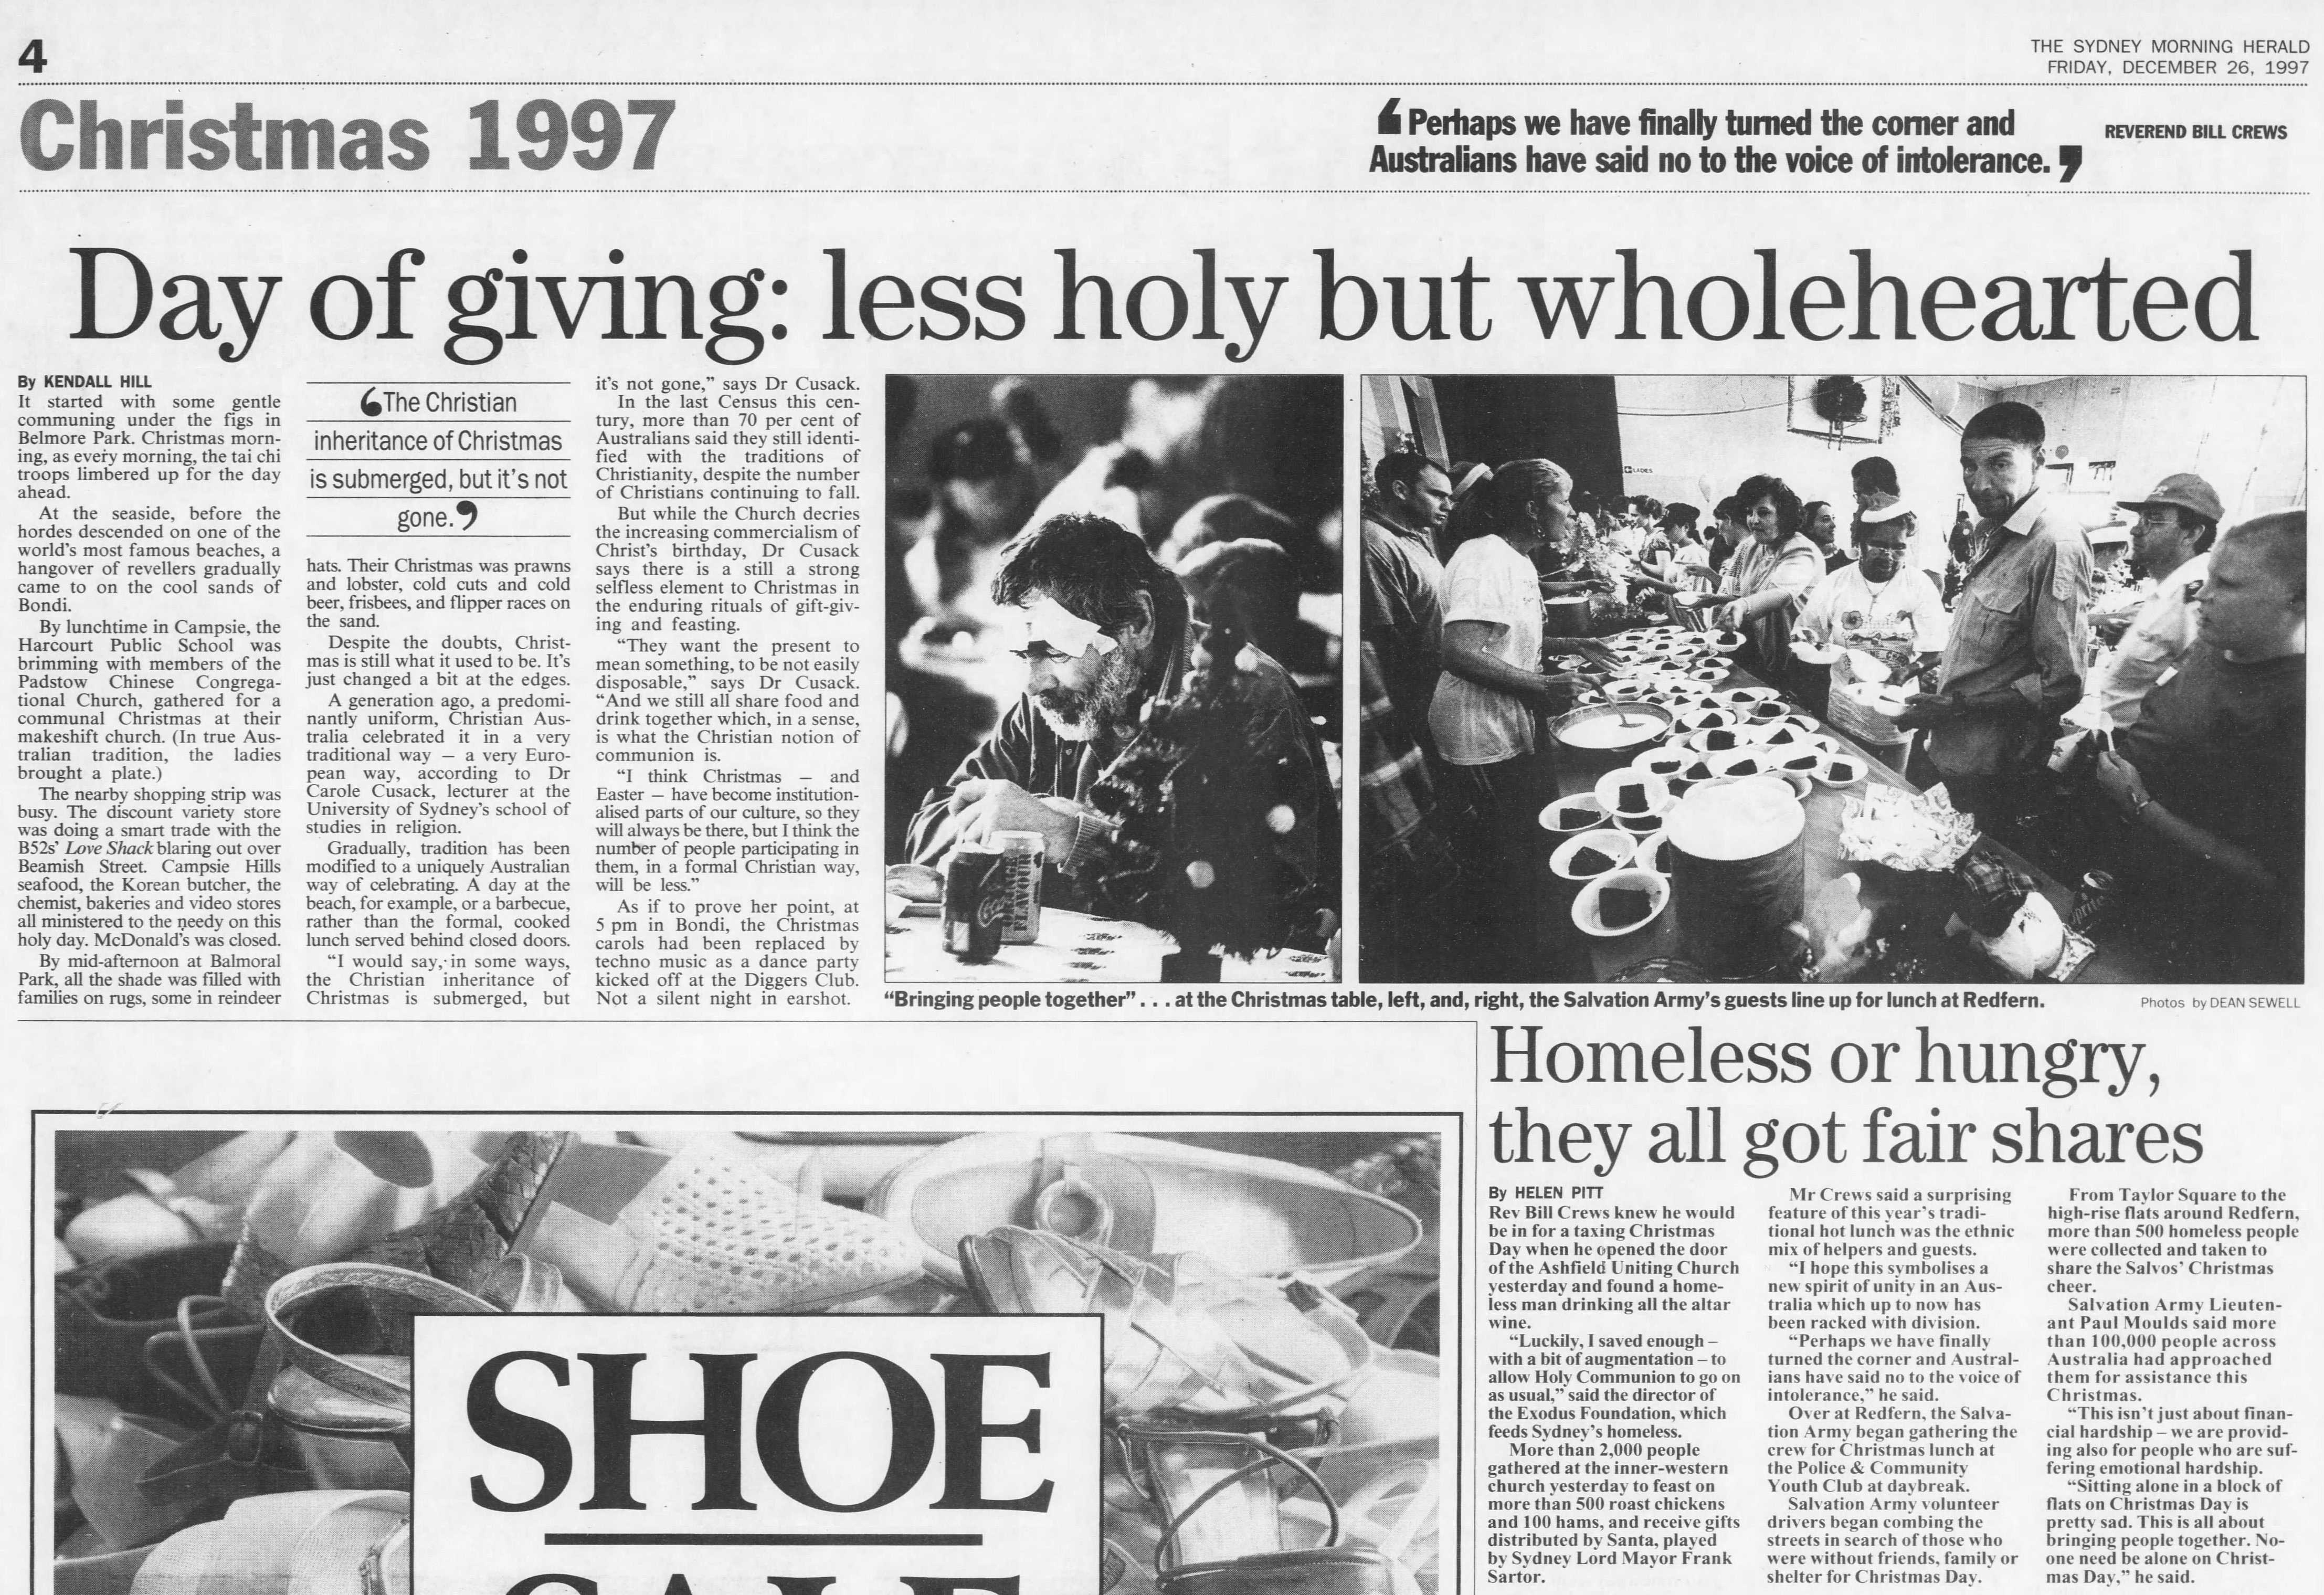 Christmas for poor and disavantaged December 26 1997 SMH 4